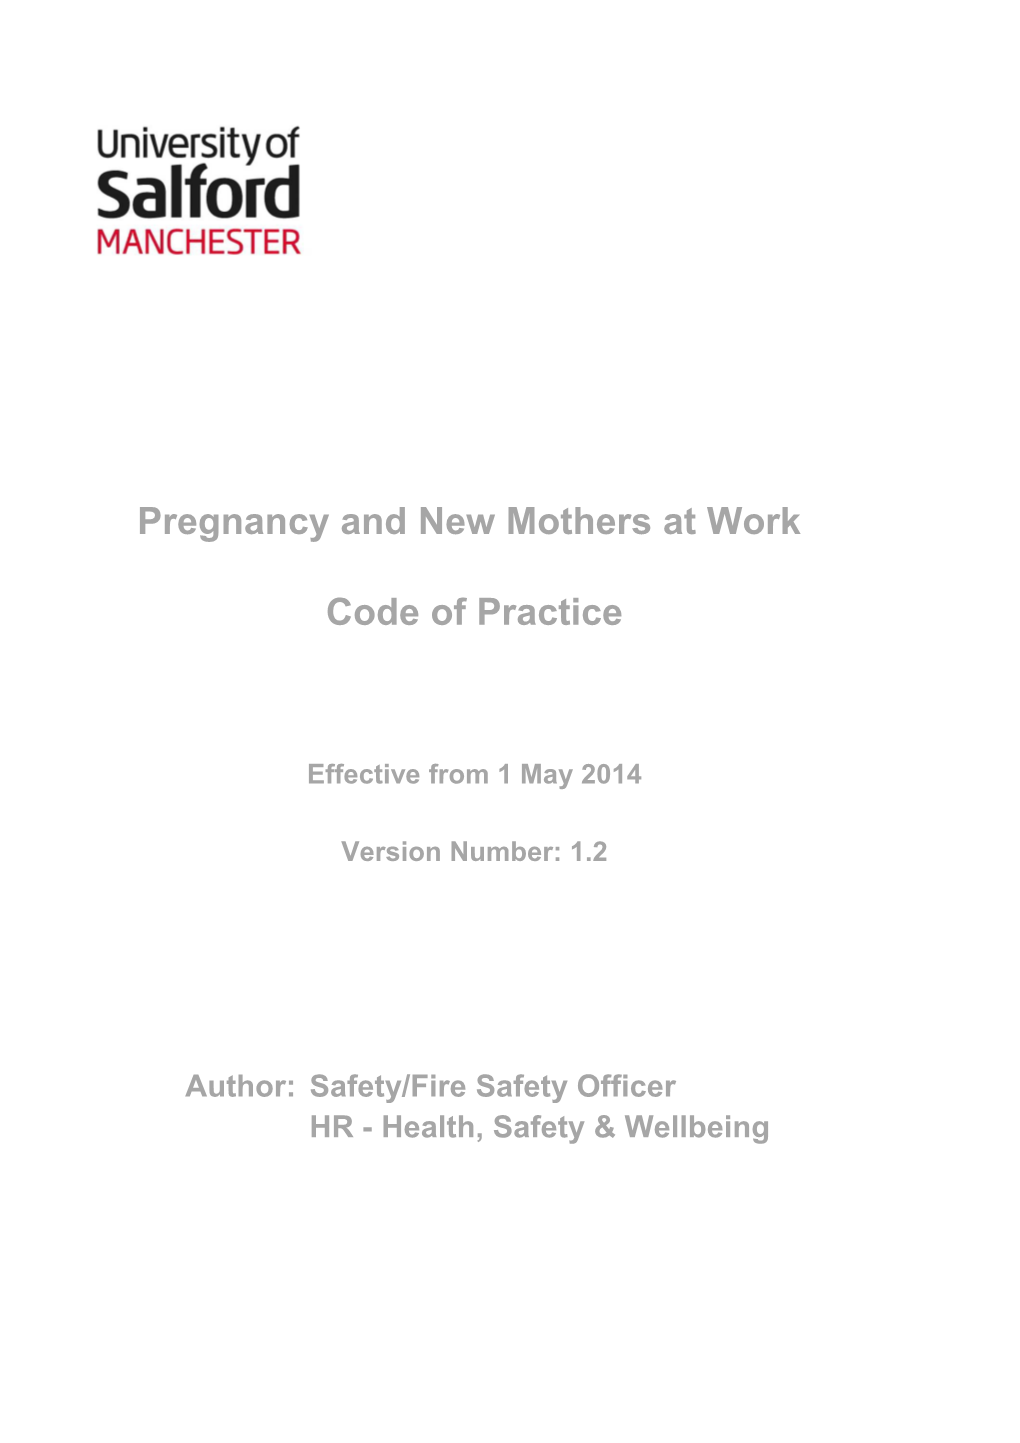 University of Salford Pregnancy and New Mothers at Work Code of Practice V1.2